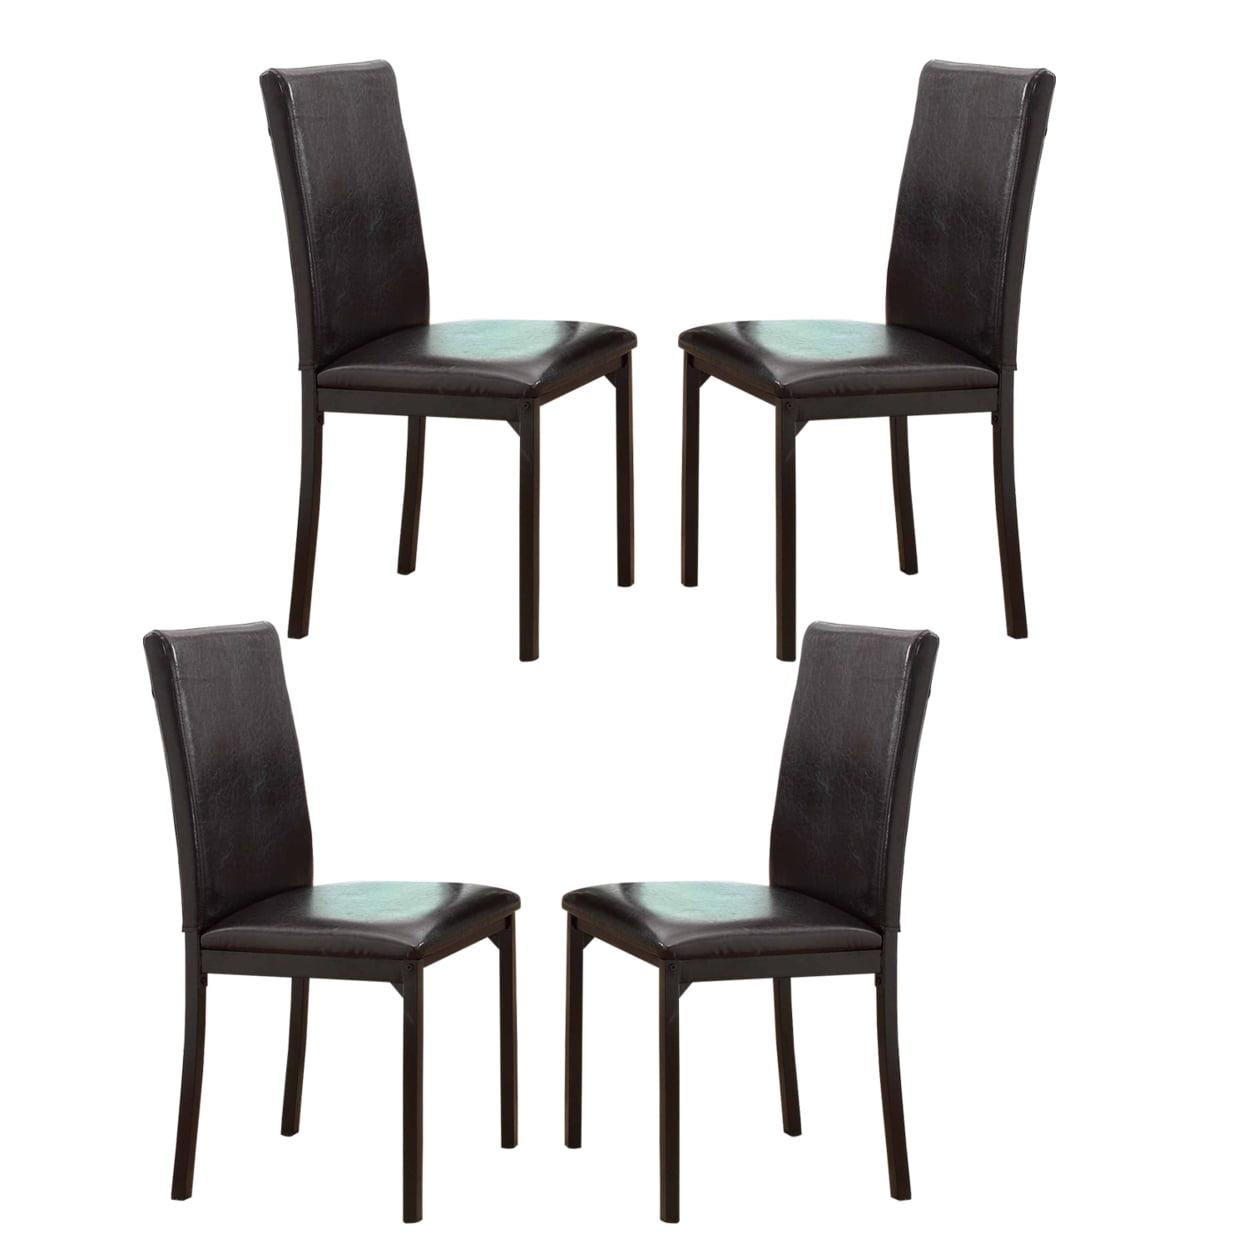 Elegant Tempe 25" Counter Height Metal Chairs in Dark Brown Faux Leather - Set of 4